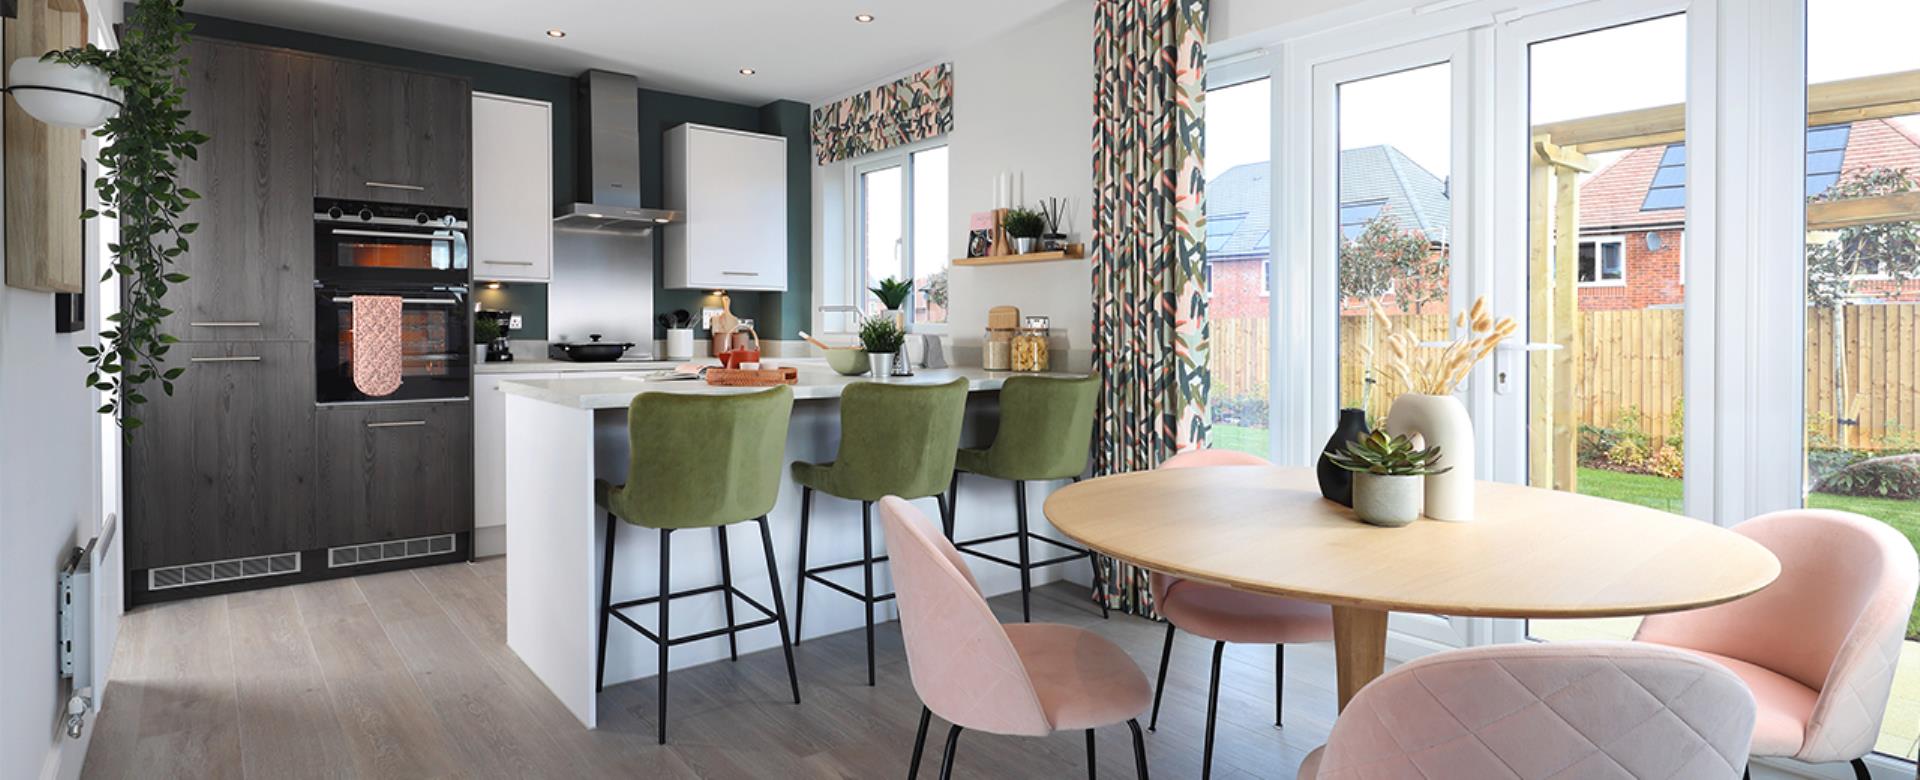 Redrow - New Homes - Kitchen and dining area